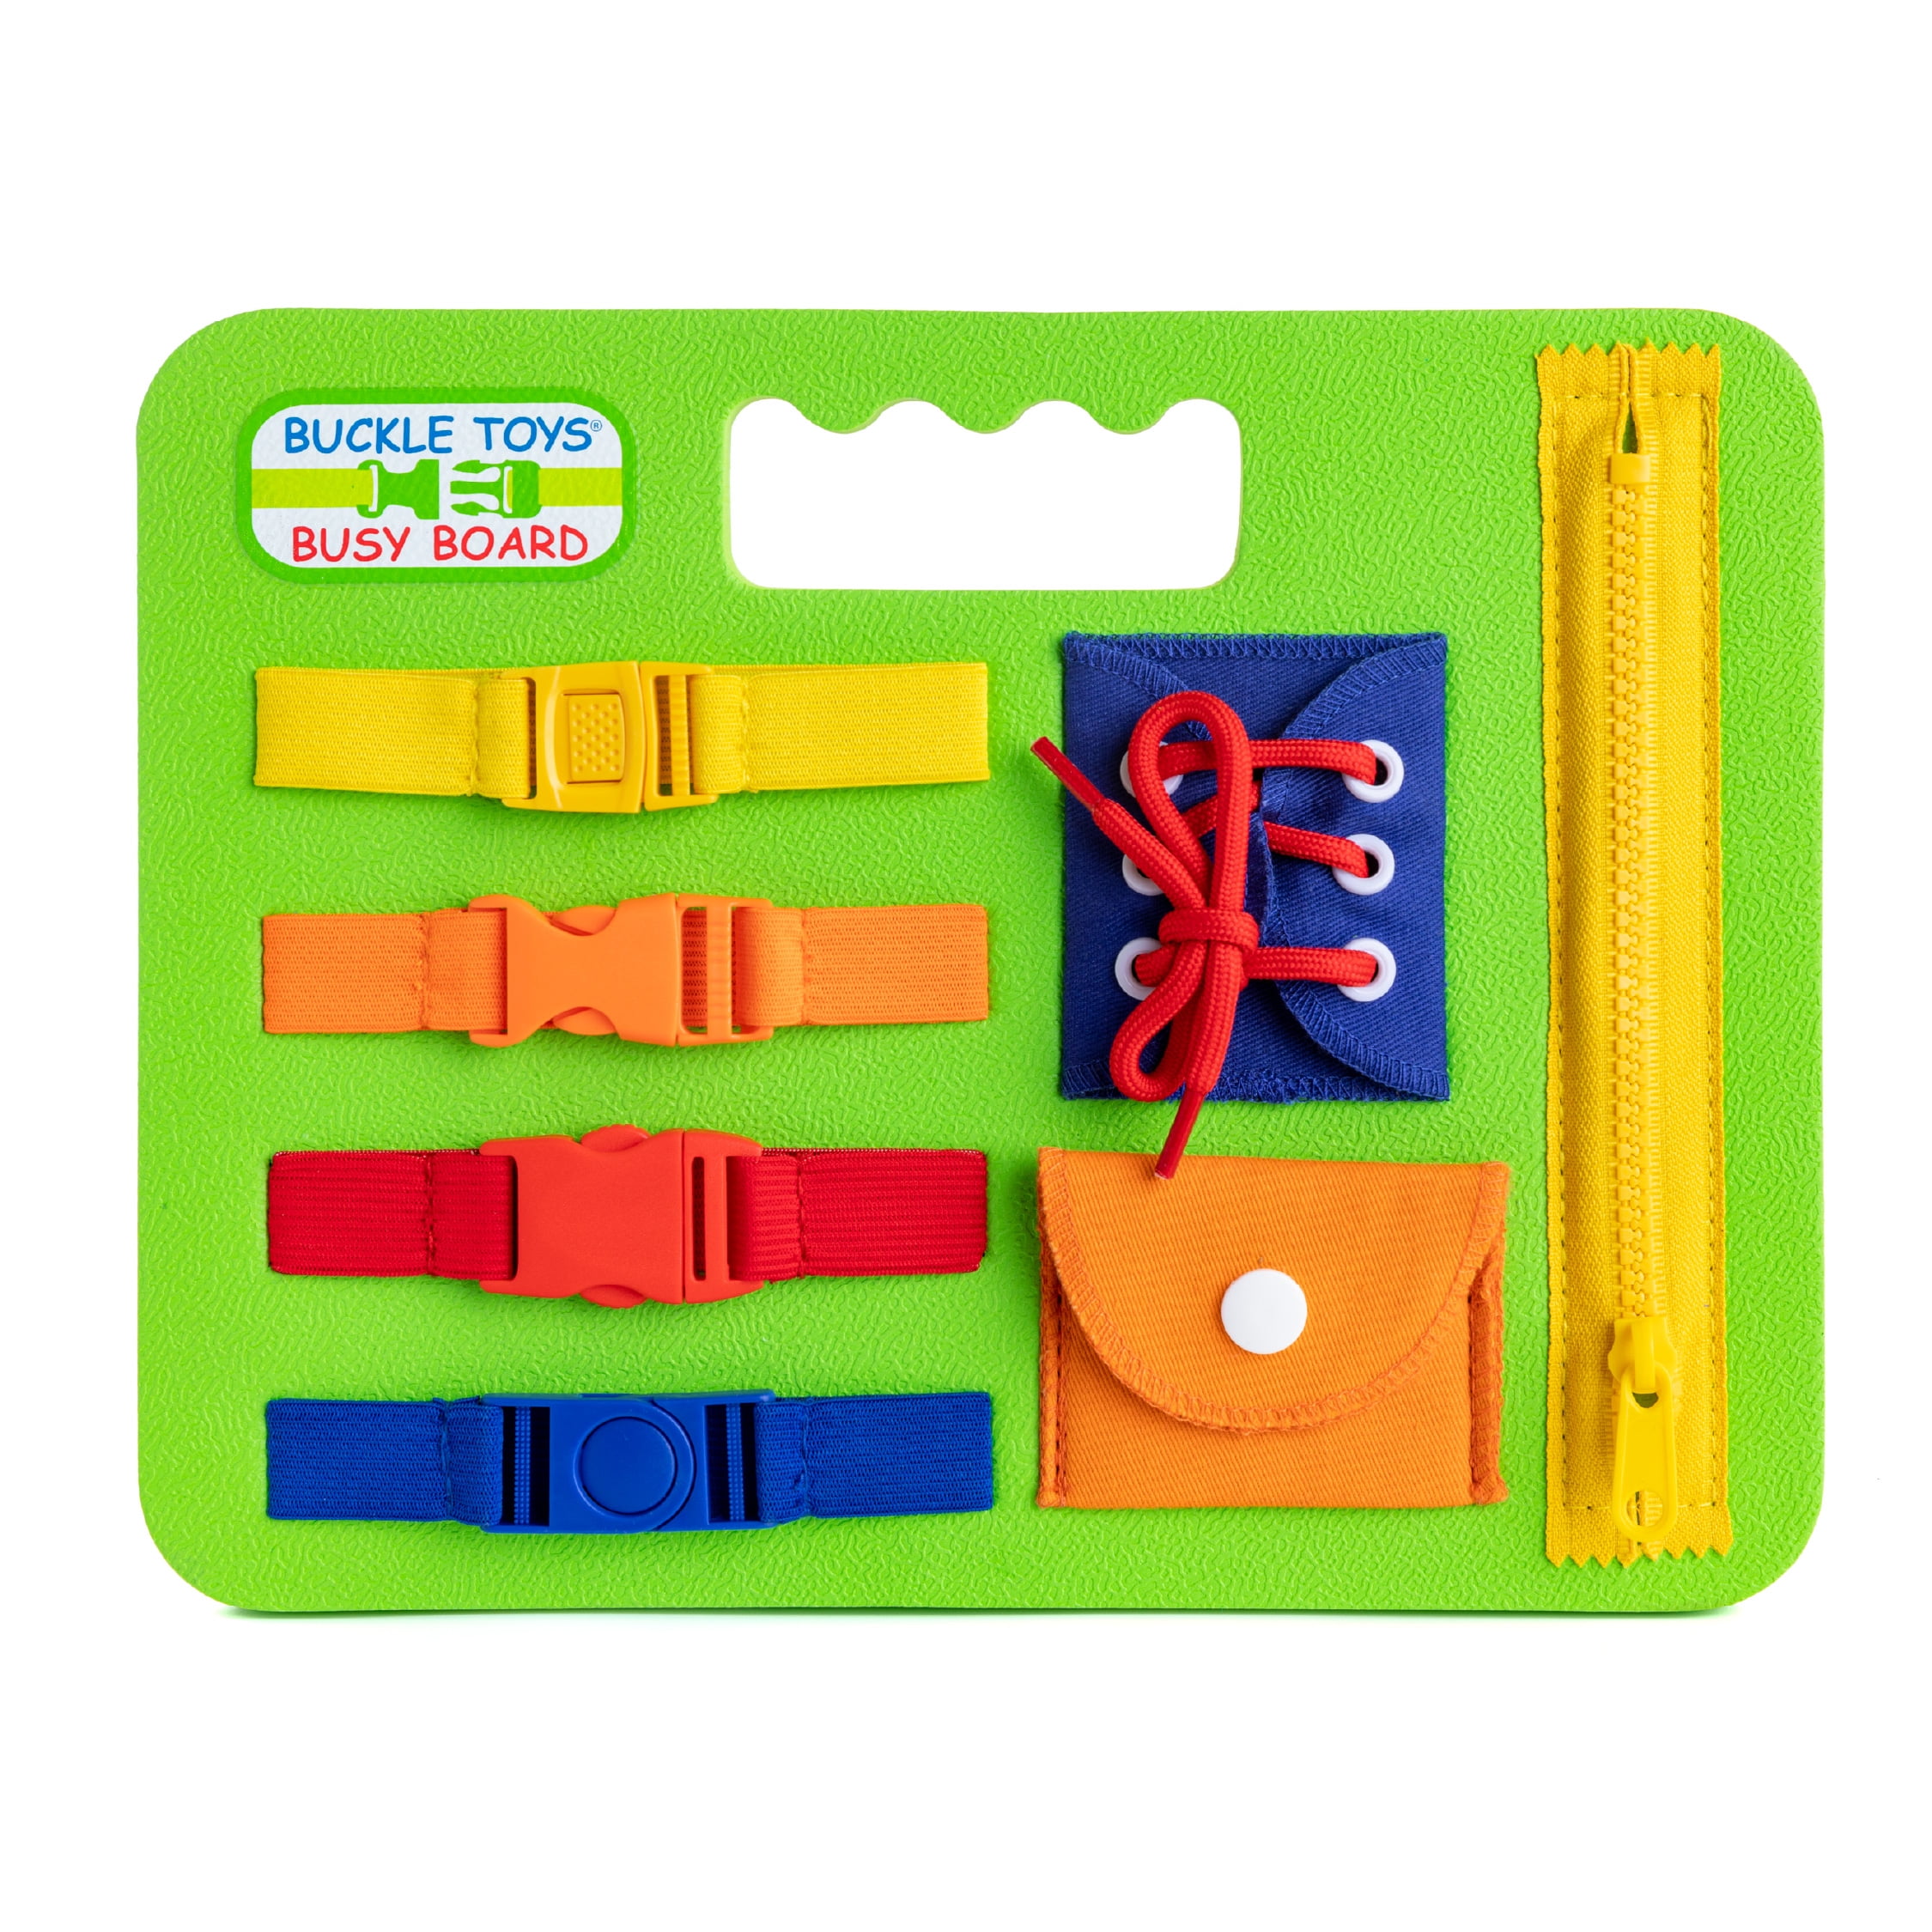 Buckle Toy Busy Board - Learn to Snap, Zip, Tie Shoe Laces and Buckle